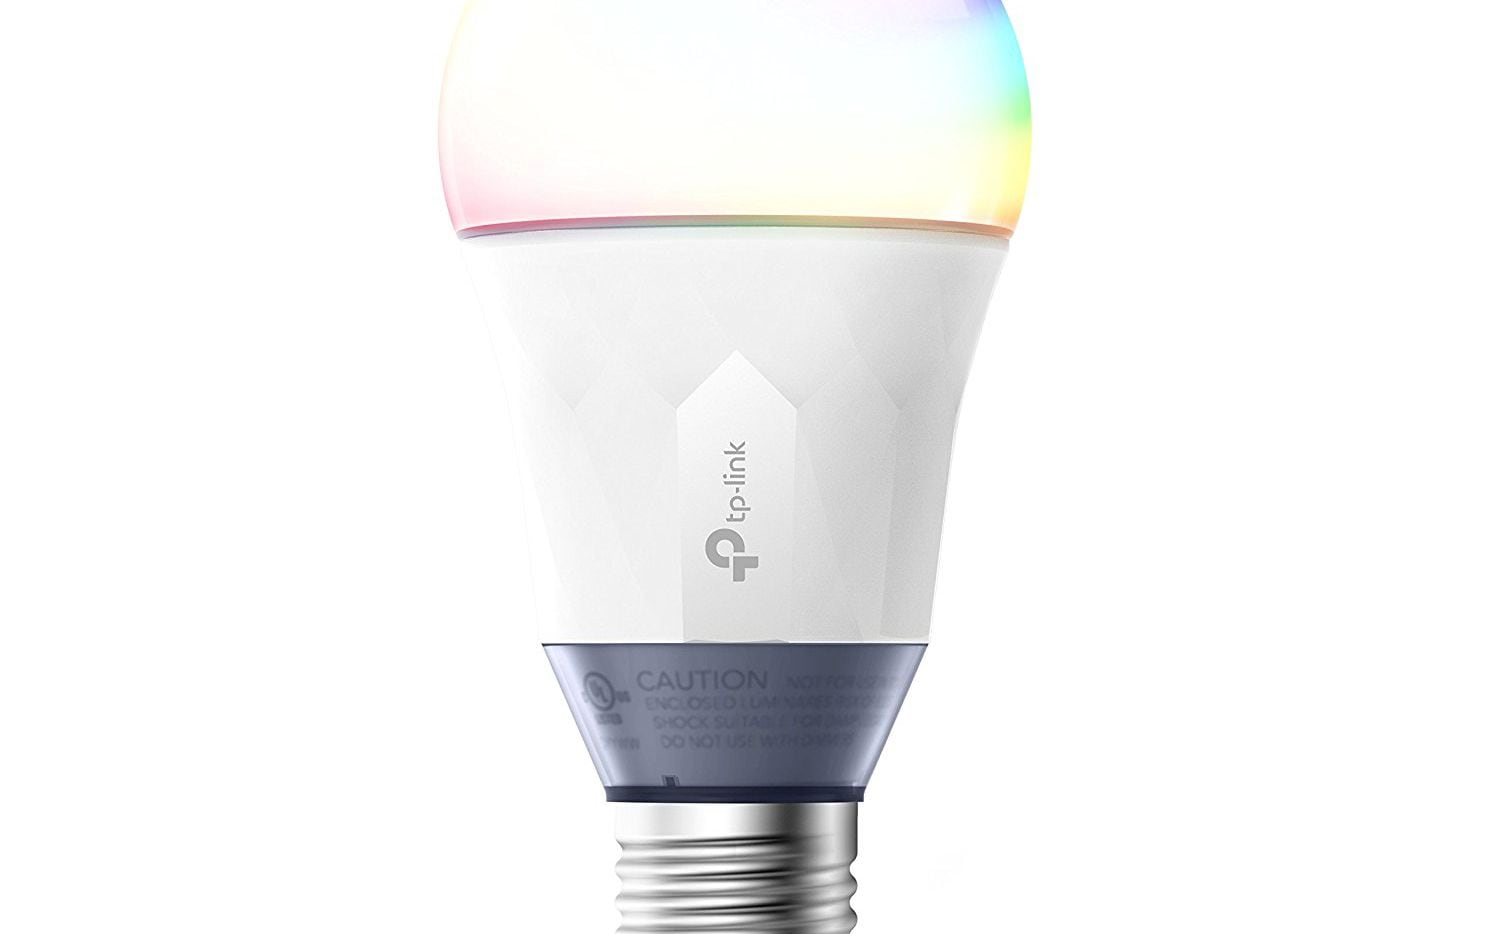 Want or Google to turn off the lights? Start with a smart bulb